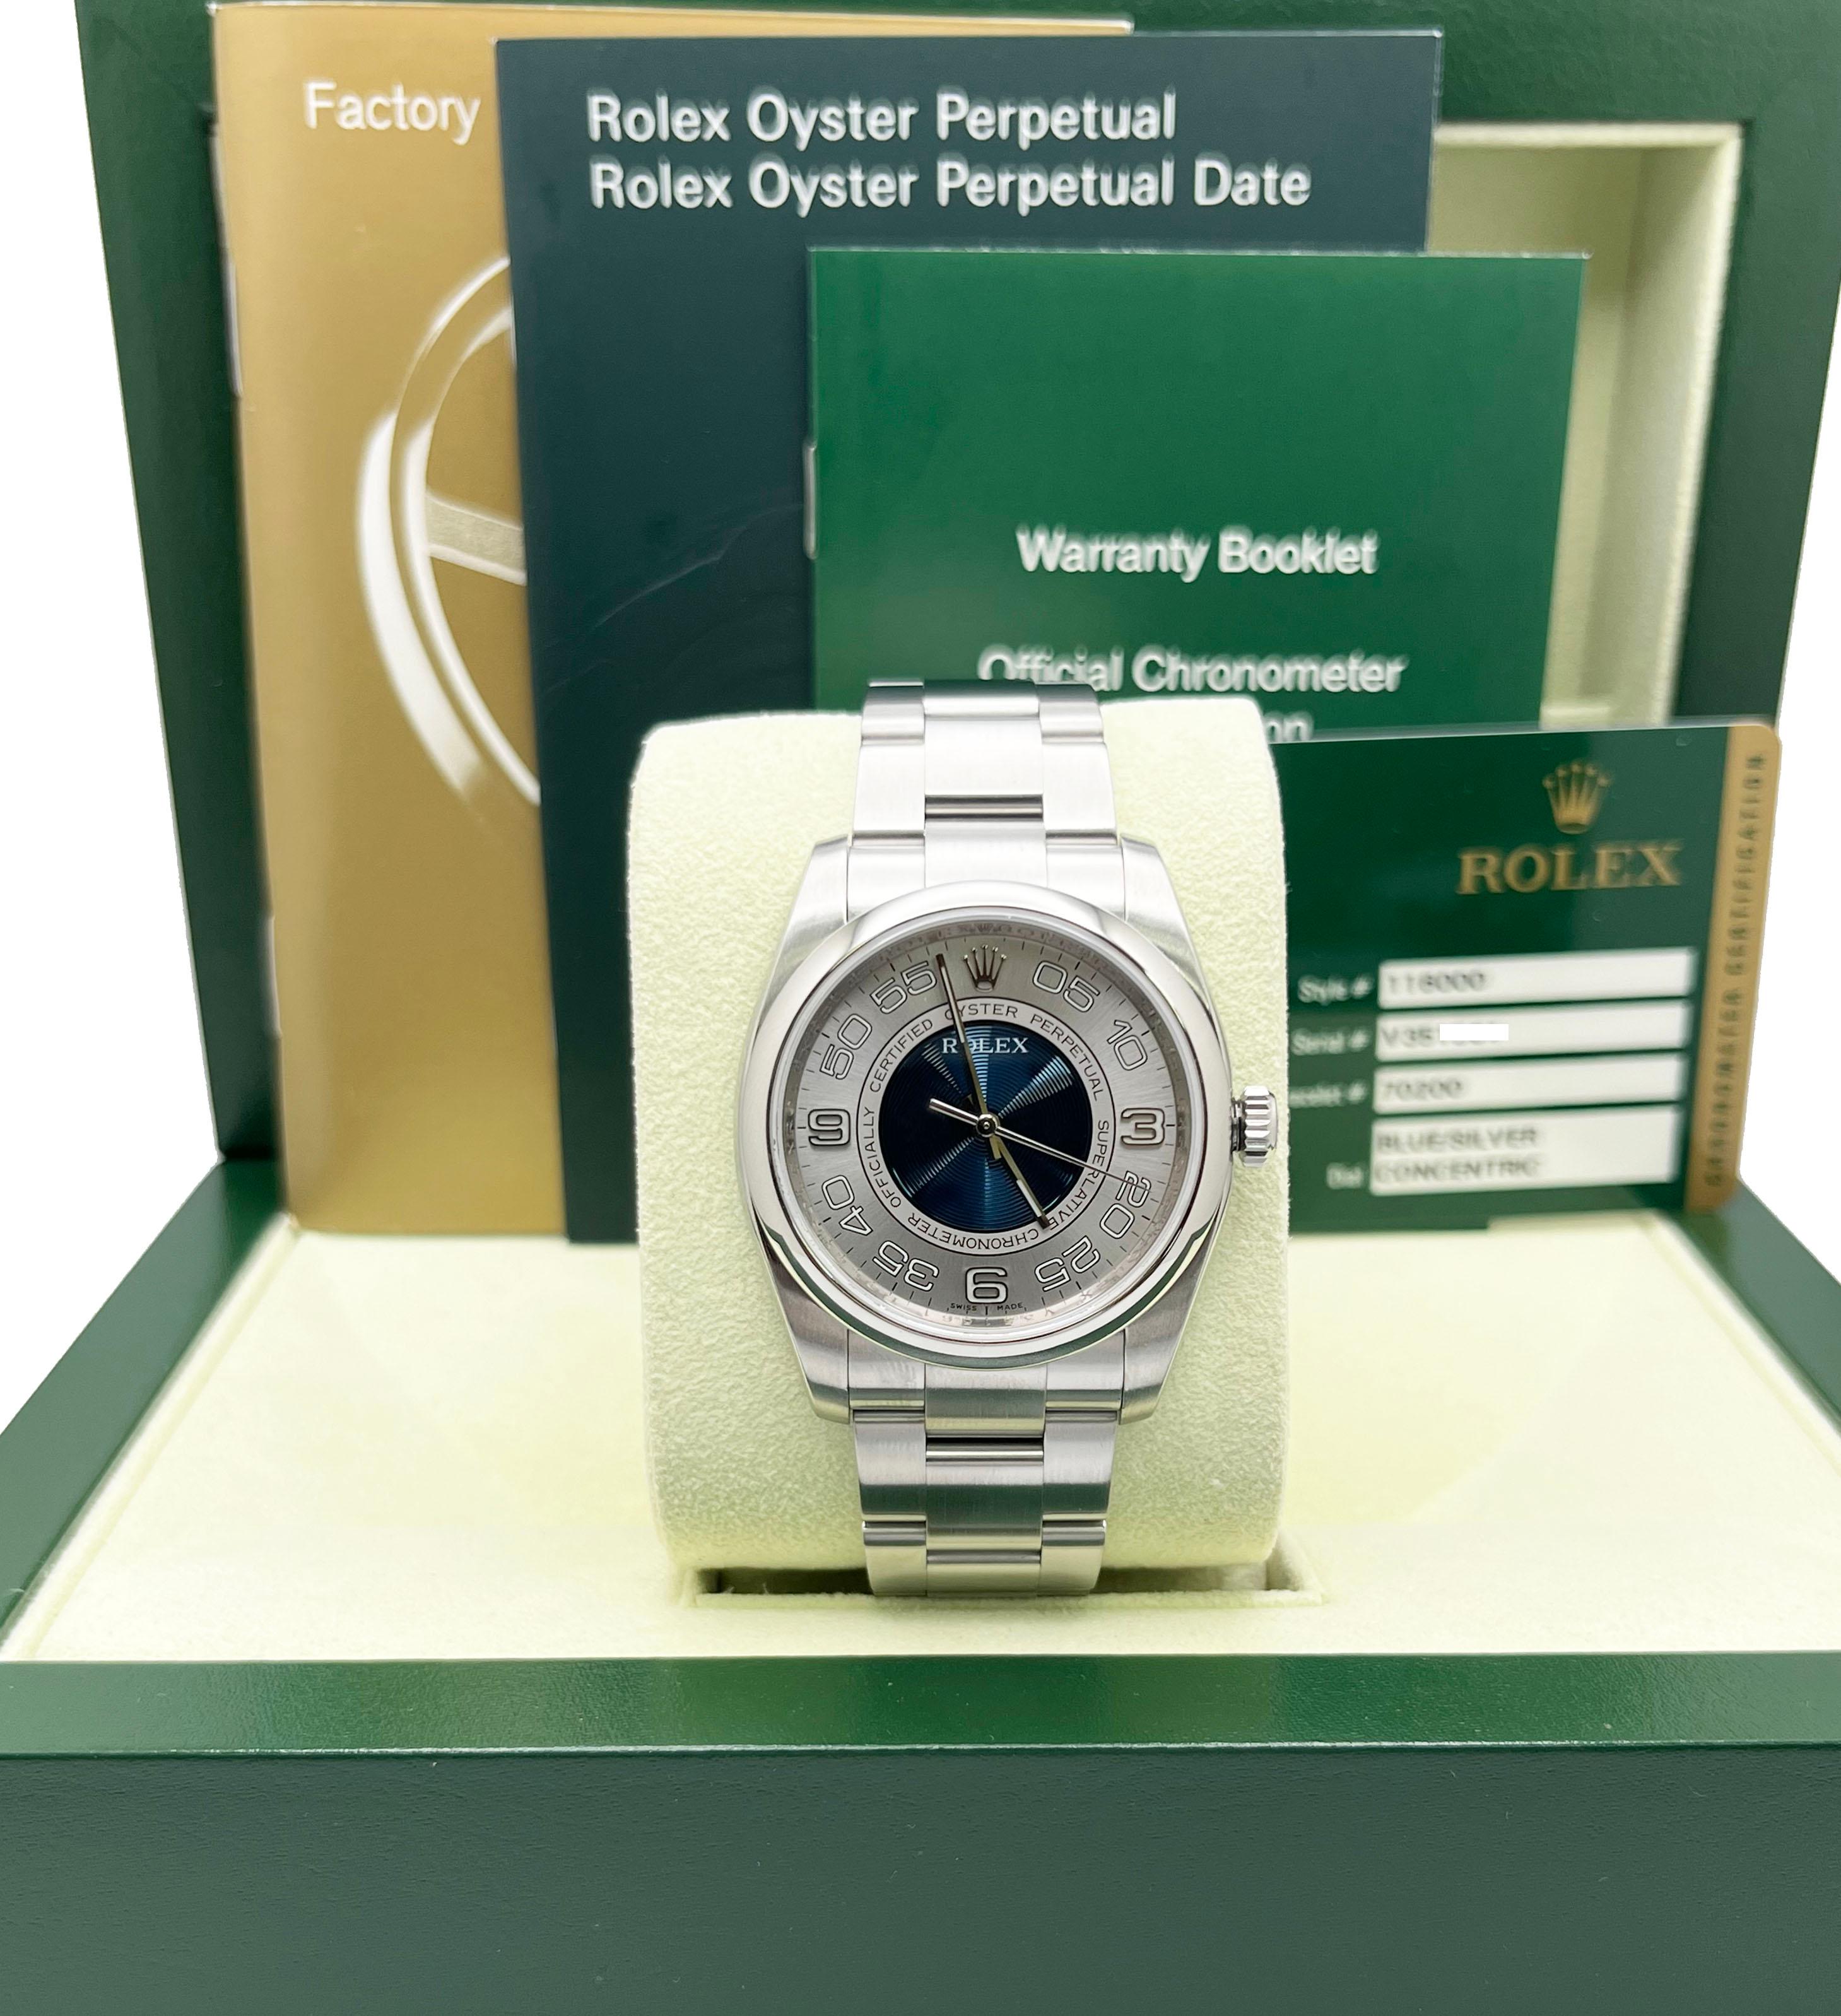 Style Number: 116000

Serial: V351***

Year: 2010

Model: Oyster Perpetual 

Case Material: Stainless Steel

Band: Stainless Steel

Bezel: Stainless Steel

Dial: Concentric Blue & Silver

Face: Sapphire Crystal

Case Size: 36 mm

Includes: 

-Rolex